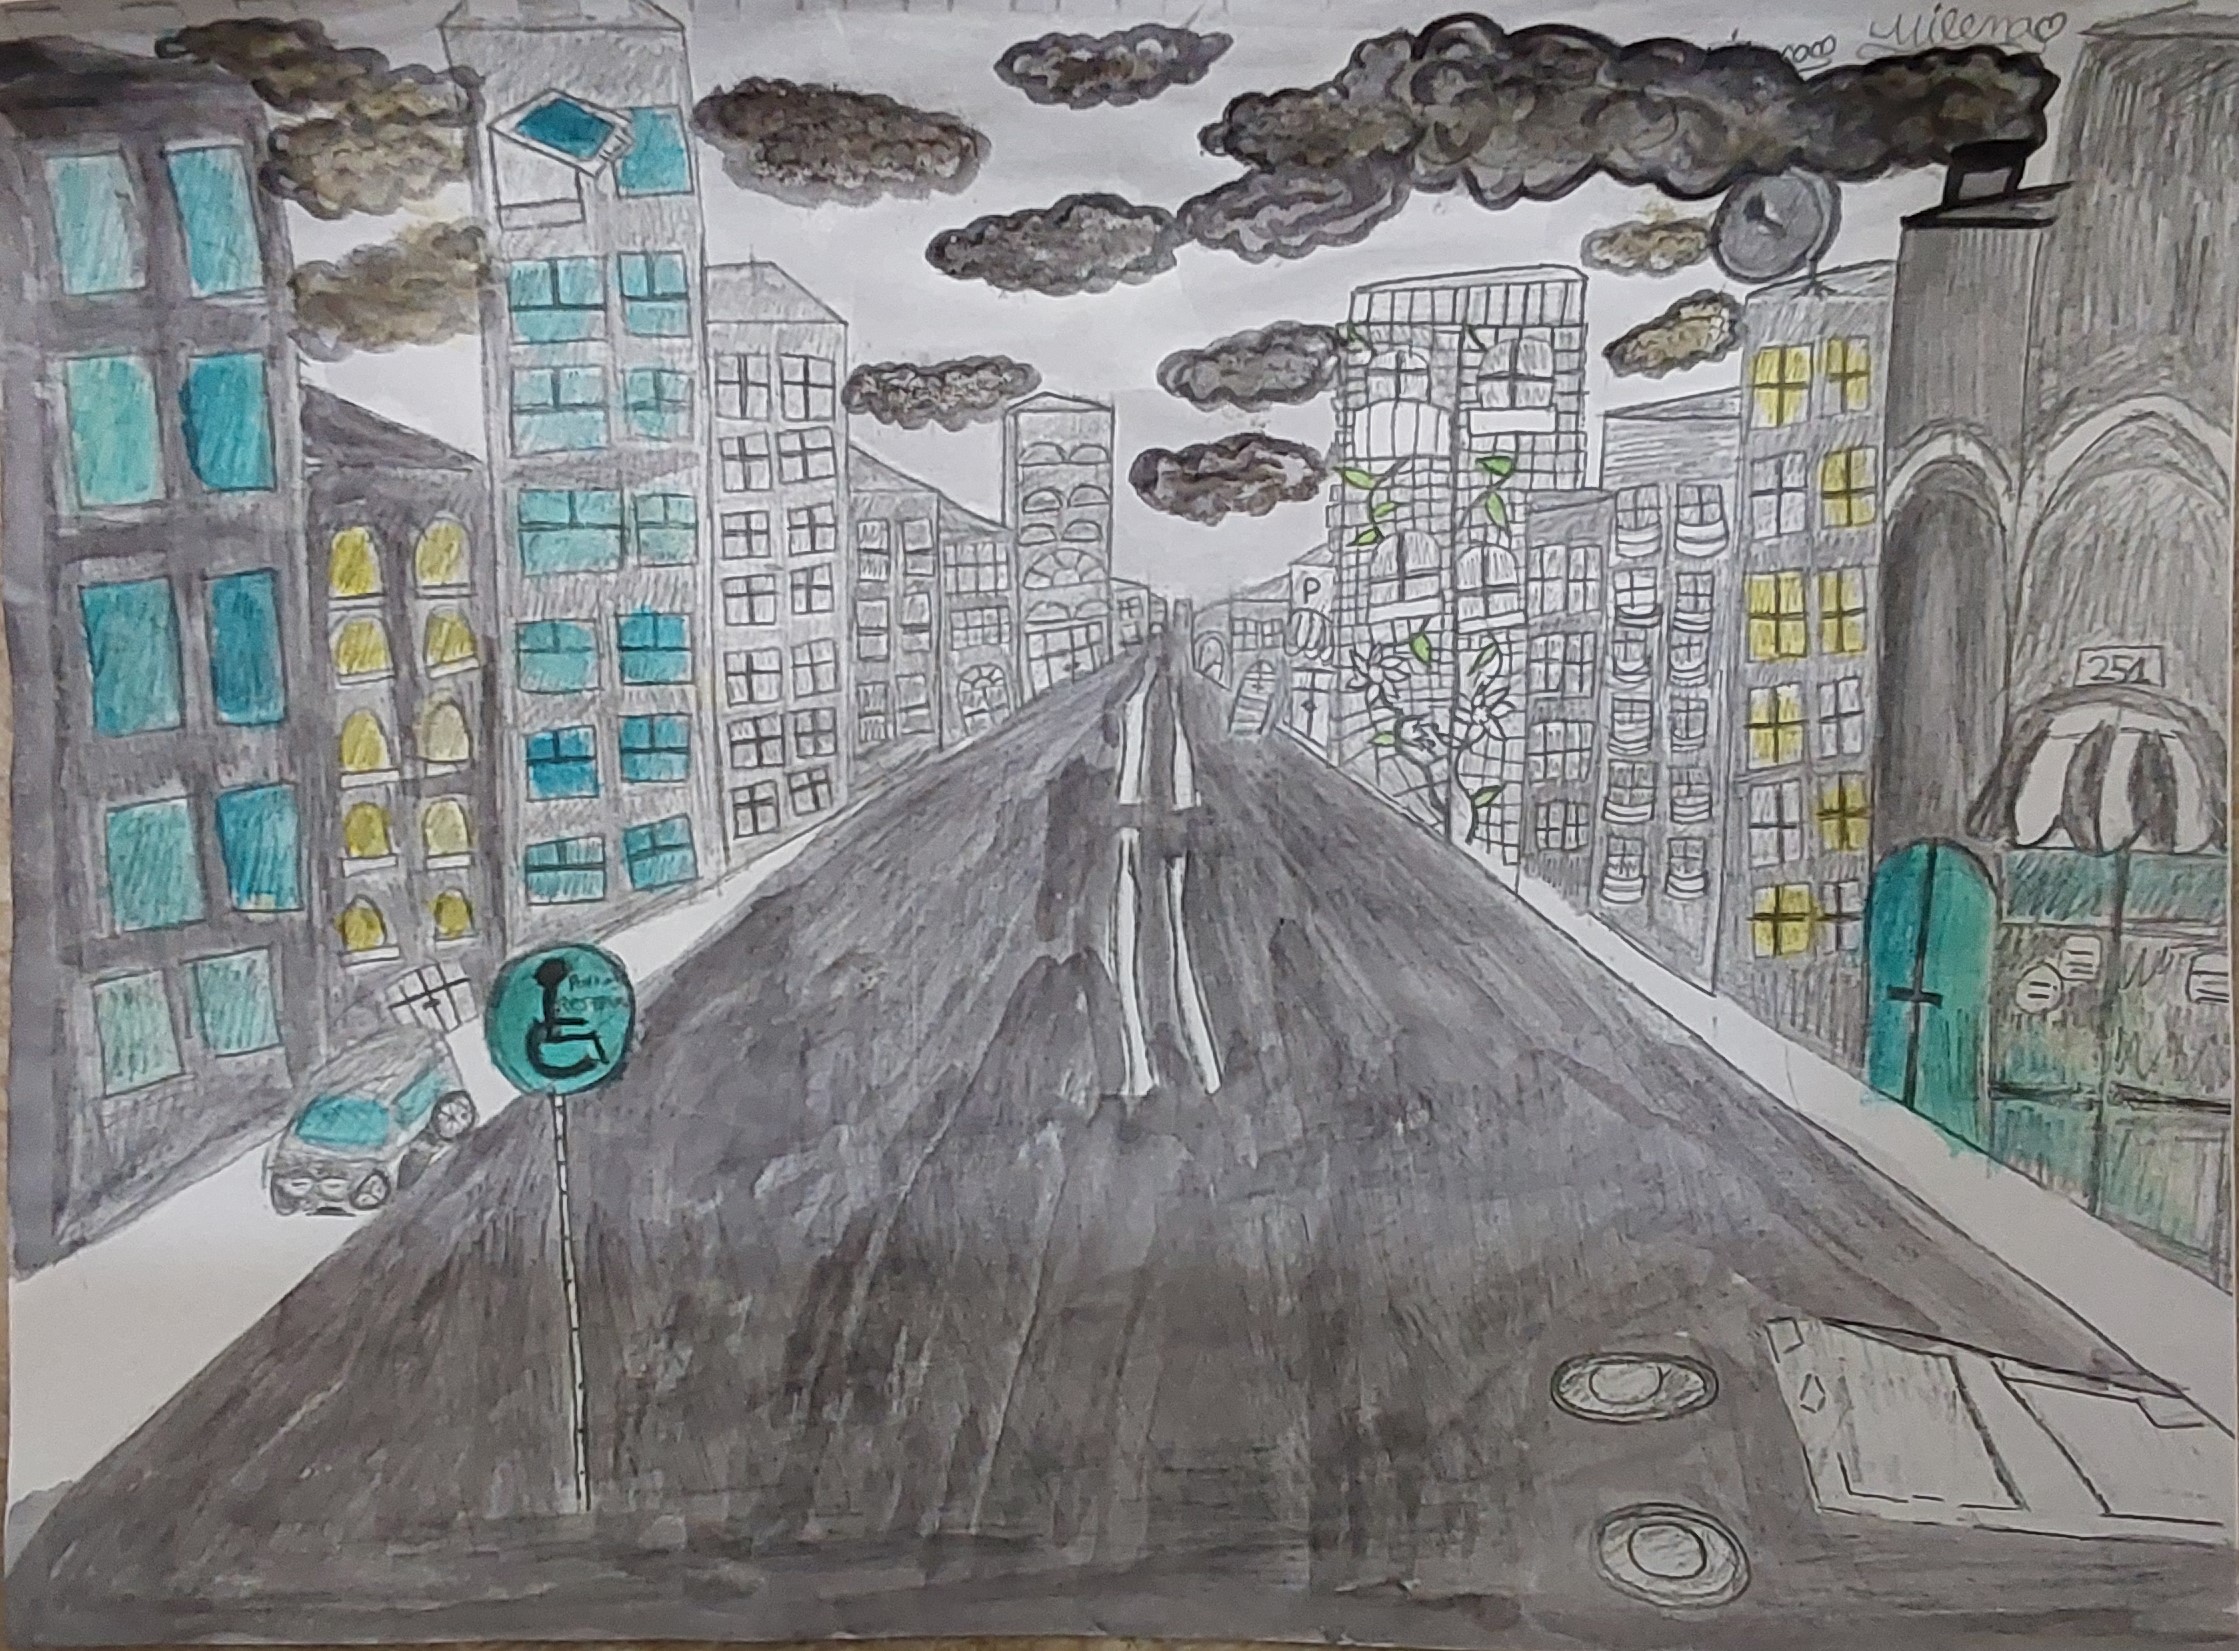 Artwork of a road going through a city during a cloudy day